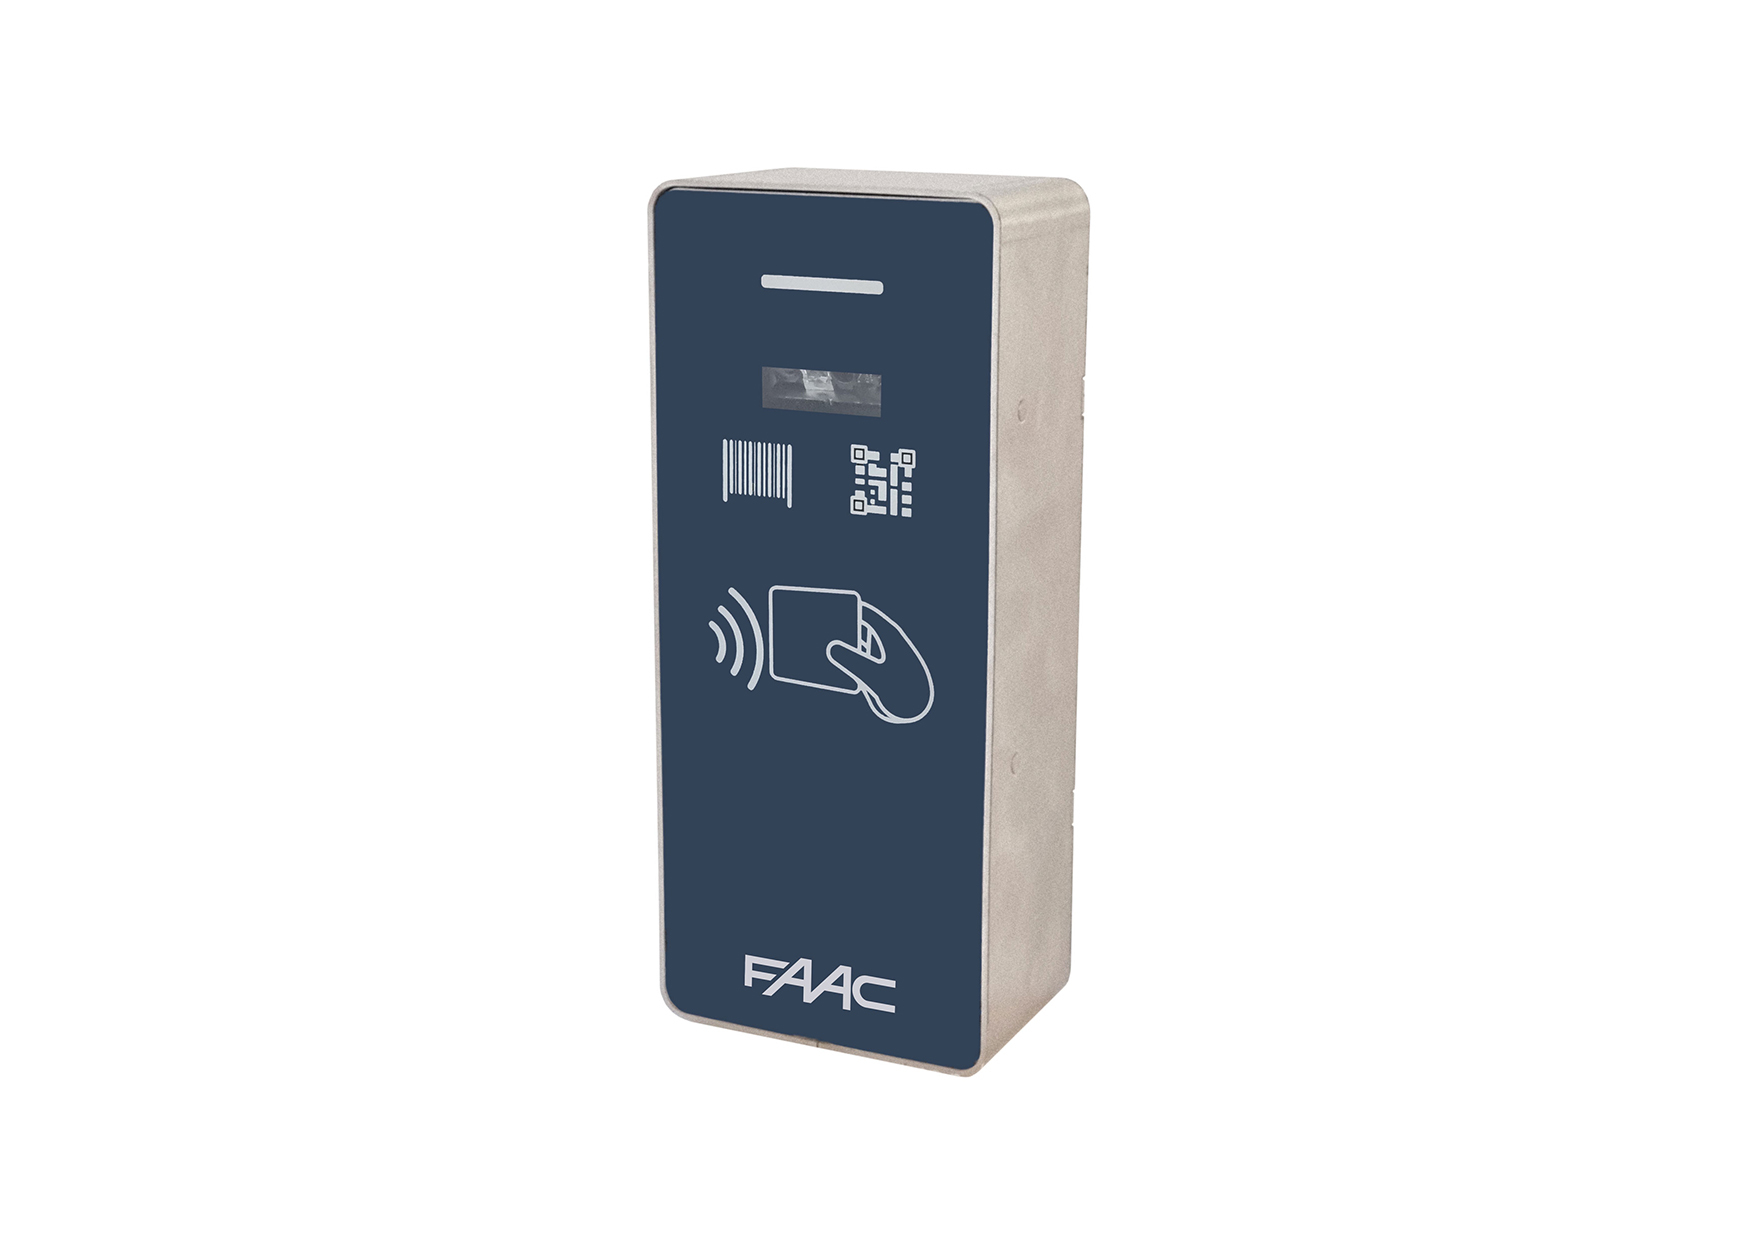 XKCP Barcode QR code and proximity reader 125KHz